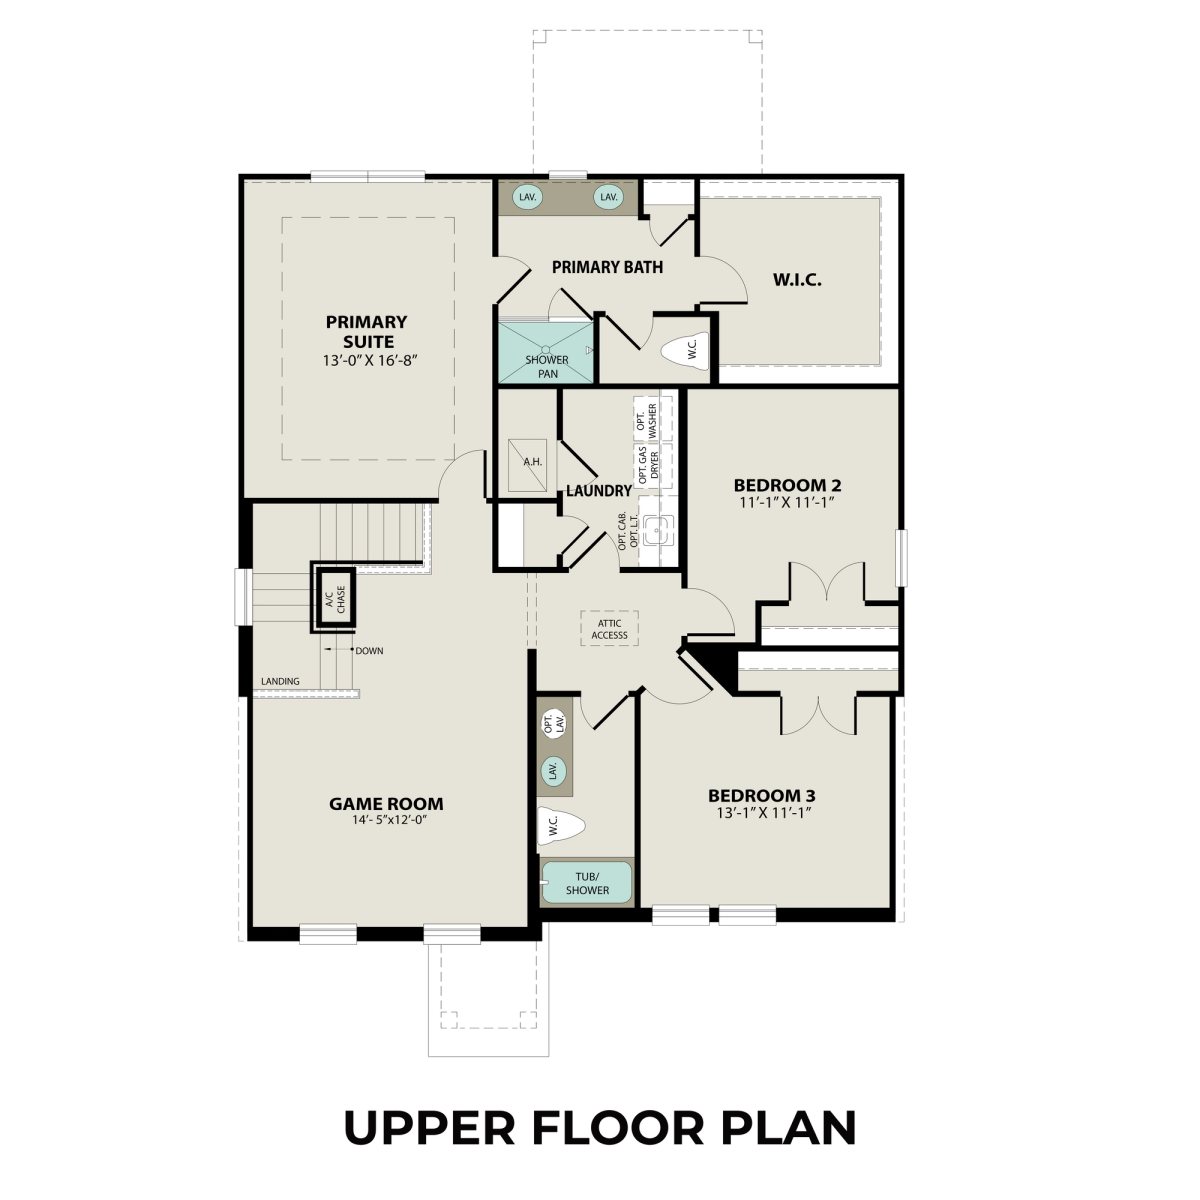 2 - The Solara A buildable floor plan layout in Davidson Homes' Emberly community.